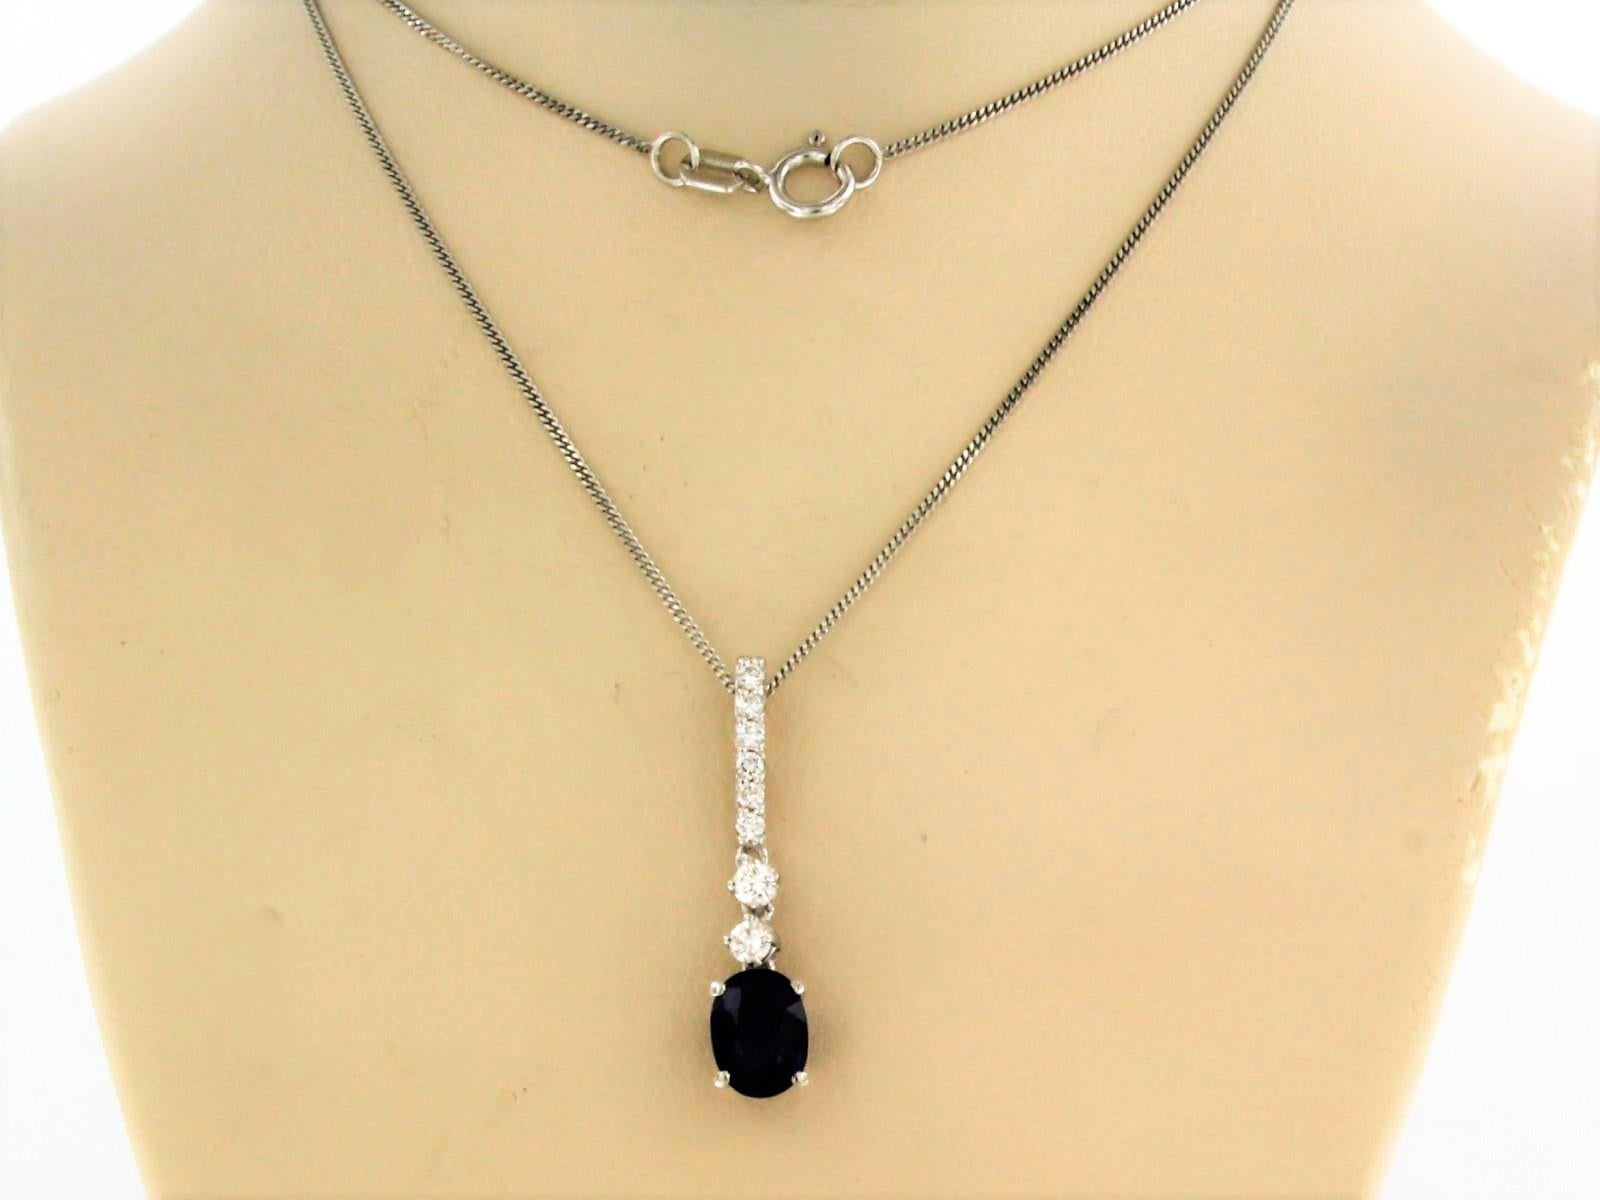 Modern Necklace and pendant set with sapphire and diamonds 14k white gold